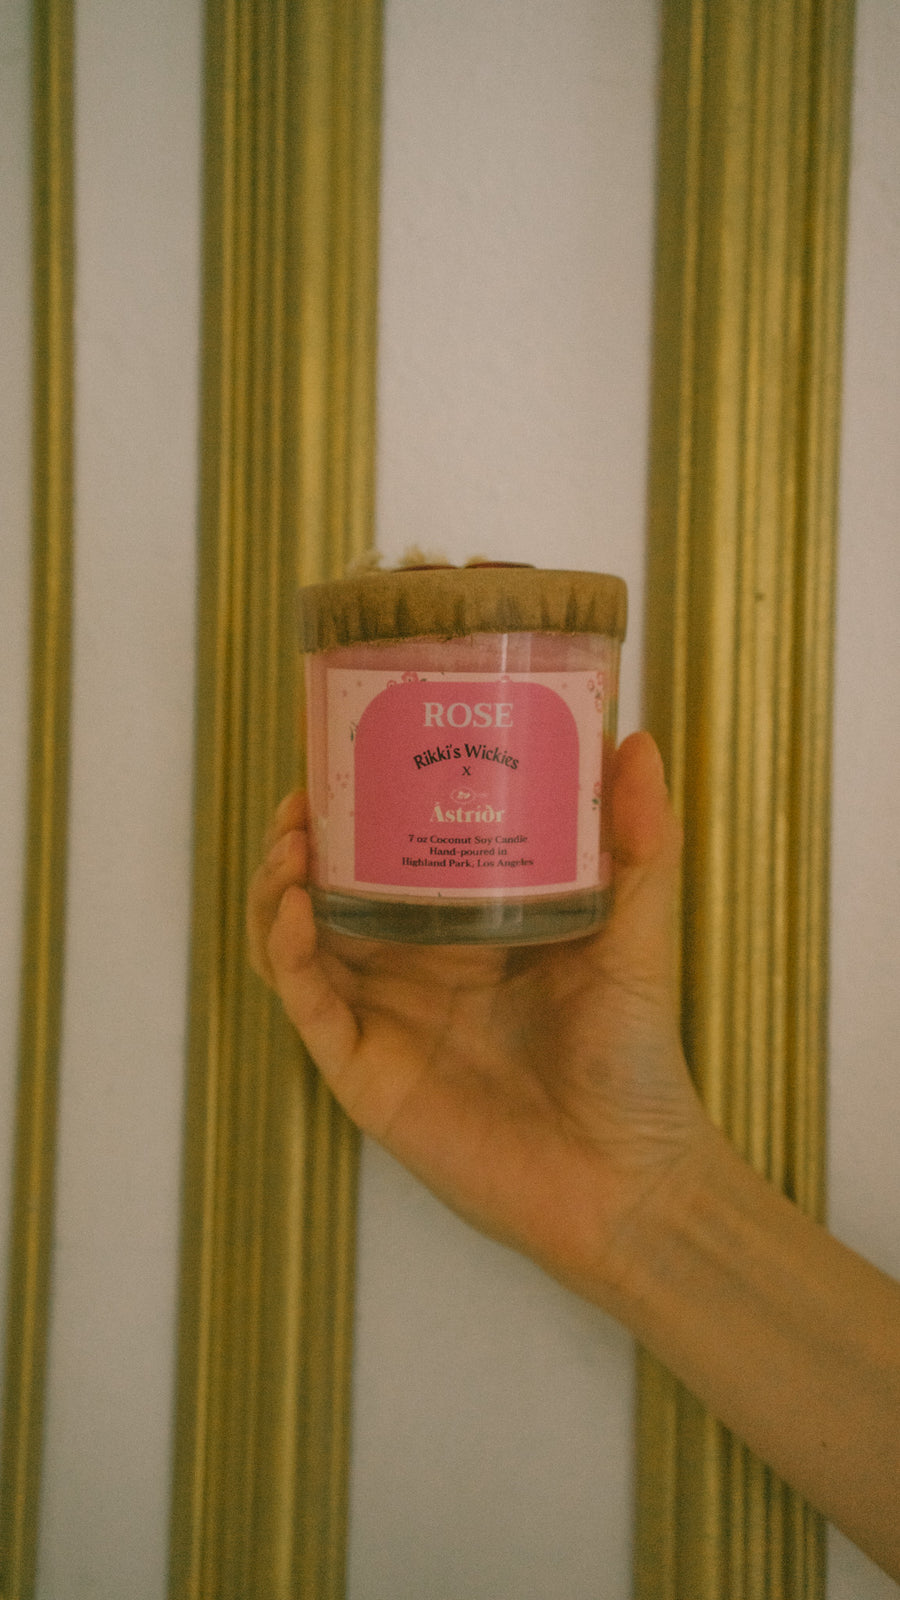 Astrior X Rikki's Wickies Collab Candles